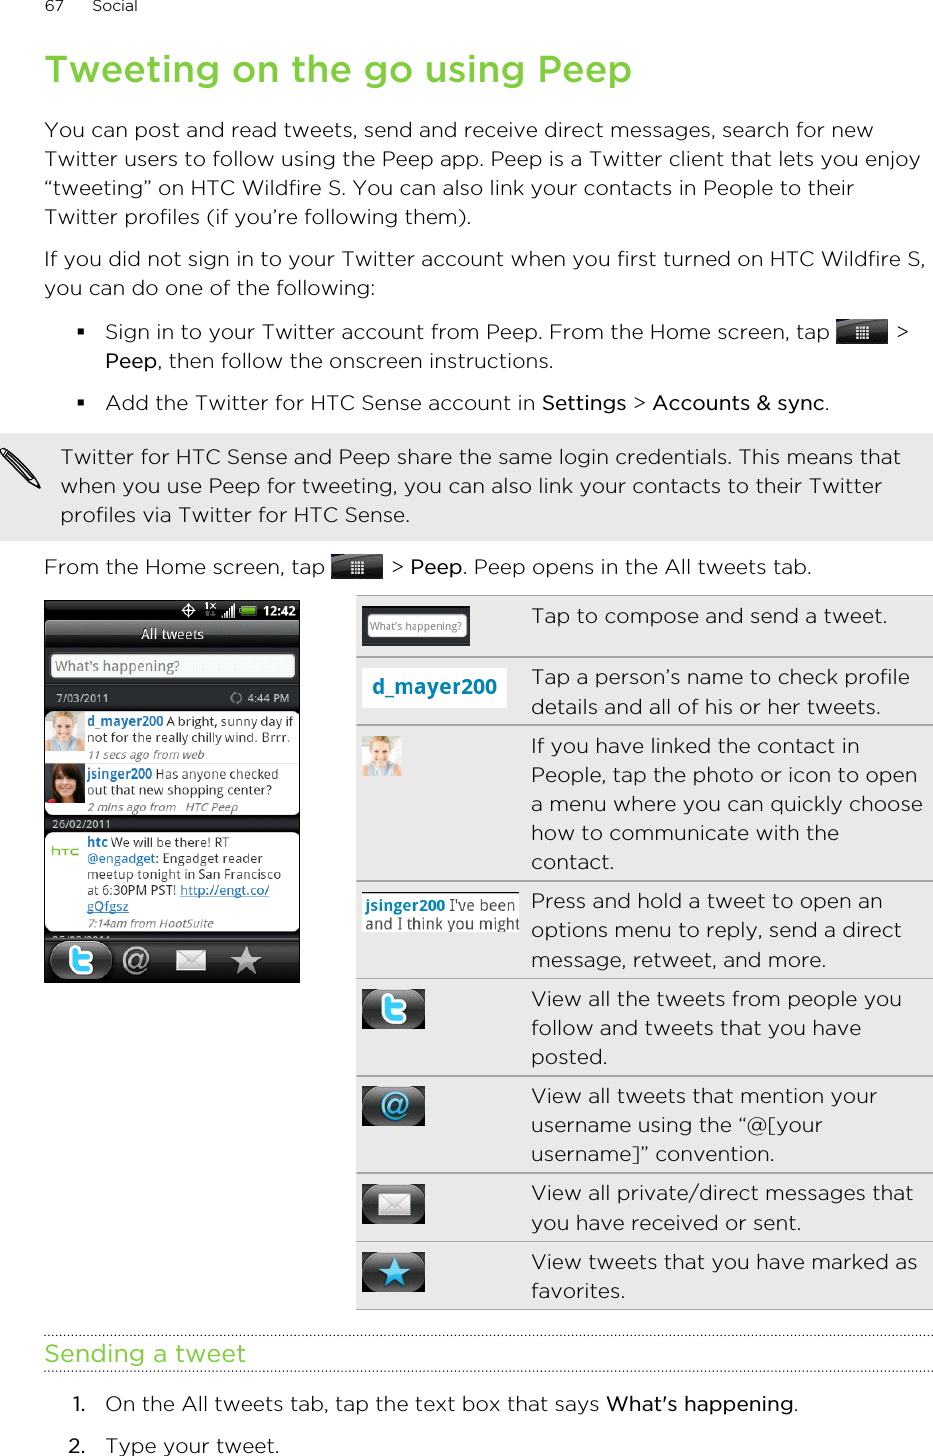 Tweeting on the go using PeepYou can post and read tweets, send and receive direct messages, search for newTwitter users to follow using the Peep app. Peep is a Twitter client that lets you enjoy“tweeting” on HTC Wildfire S. You can also link your contacts in People to theirTwitter profiles (if you’re following them).If you did not sign in to your Twitter account when you first turned on HTC Wildfire S,you can do one of the following:§Sign in to your Twitter account from Peep. From the Home screen, tap   &gt;Peep, then follow the onscreen instructions.§Add the Twitter for HTC Sense account in Settings &gt; Accounts &amp; sync.Twitter for HTC Sense and Peep share the same login credentials. This means thatwhen you use Peep for tweeting, you can also link your contacts to their Twitterprofiles via Twitter for HTC Sense.From the Home screen, tap   &gt; Peep. Peep opens in the All tweets tab.Tap to compose and send a tweet.Tap a person’s name to check profiledetails and all of his or her tweets.If you have linked the contact inPeople, tap the photo or icon to opena menu where you can quickly choosehow to communicate with thecontact.Press and hold a tweet to open anoptions menu to reply, send a directmessage, retweet, and more.View all the tweets from people youfollow and tweets that you haveposted.View all tweets that mention yourusername using the “@[yourusername]” convention.View all private/direct messages thatyou have received or sent.View tweets that you have marked asfavorites.Sending a tweet1. On the All tweets tab, tap the text box that says What&apos;s happening.2. Type your tweet.67 Social